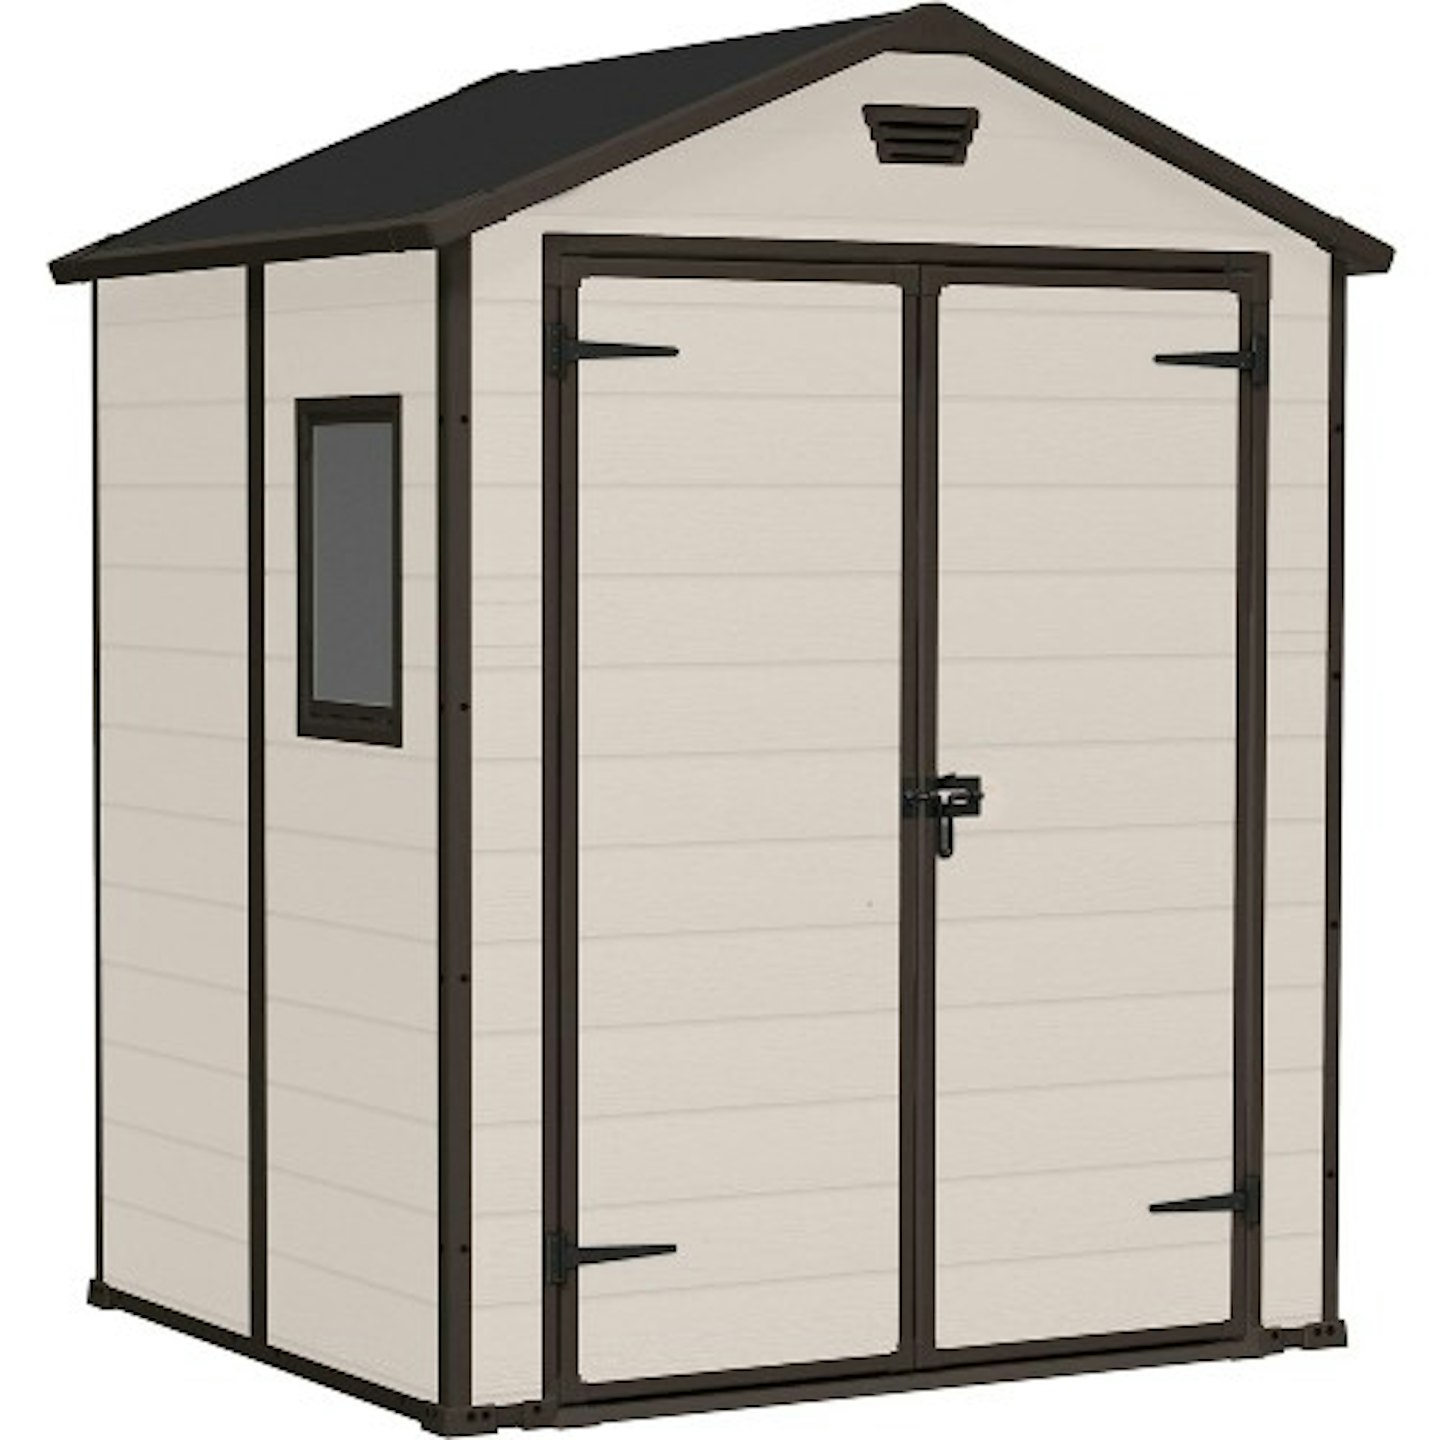 Keter Manor plastic shed 